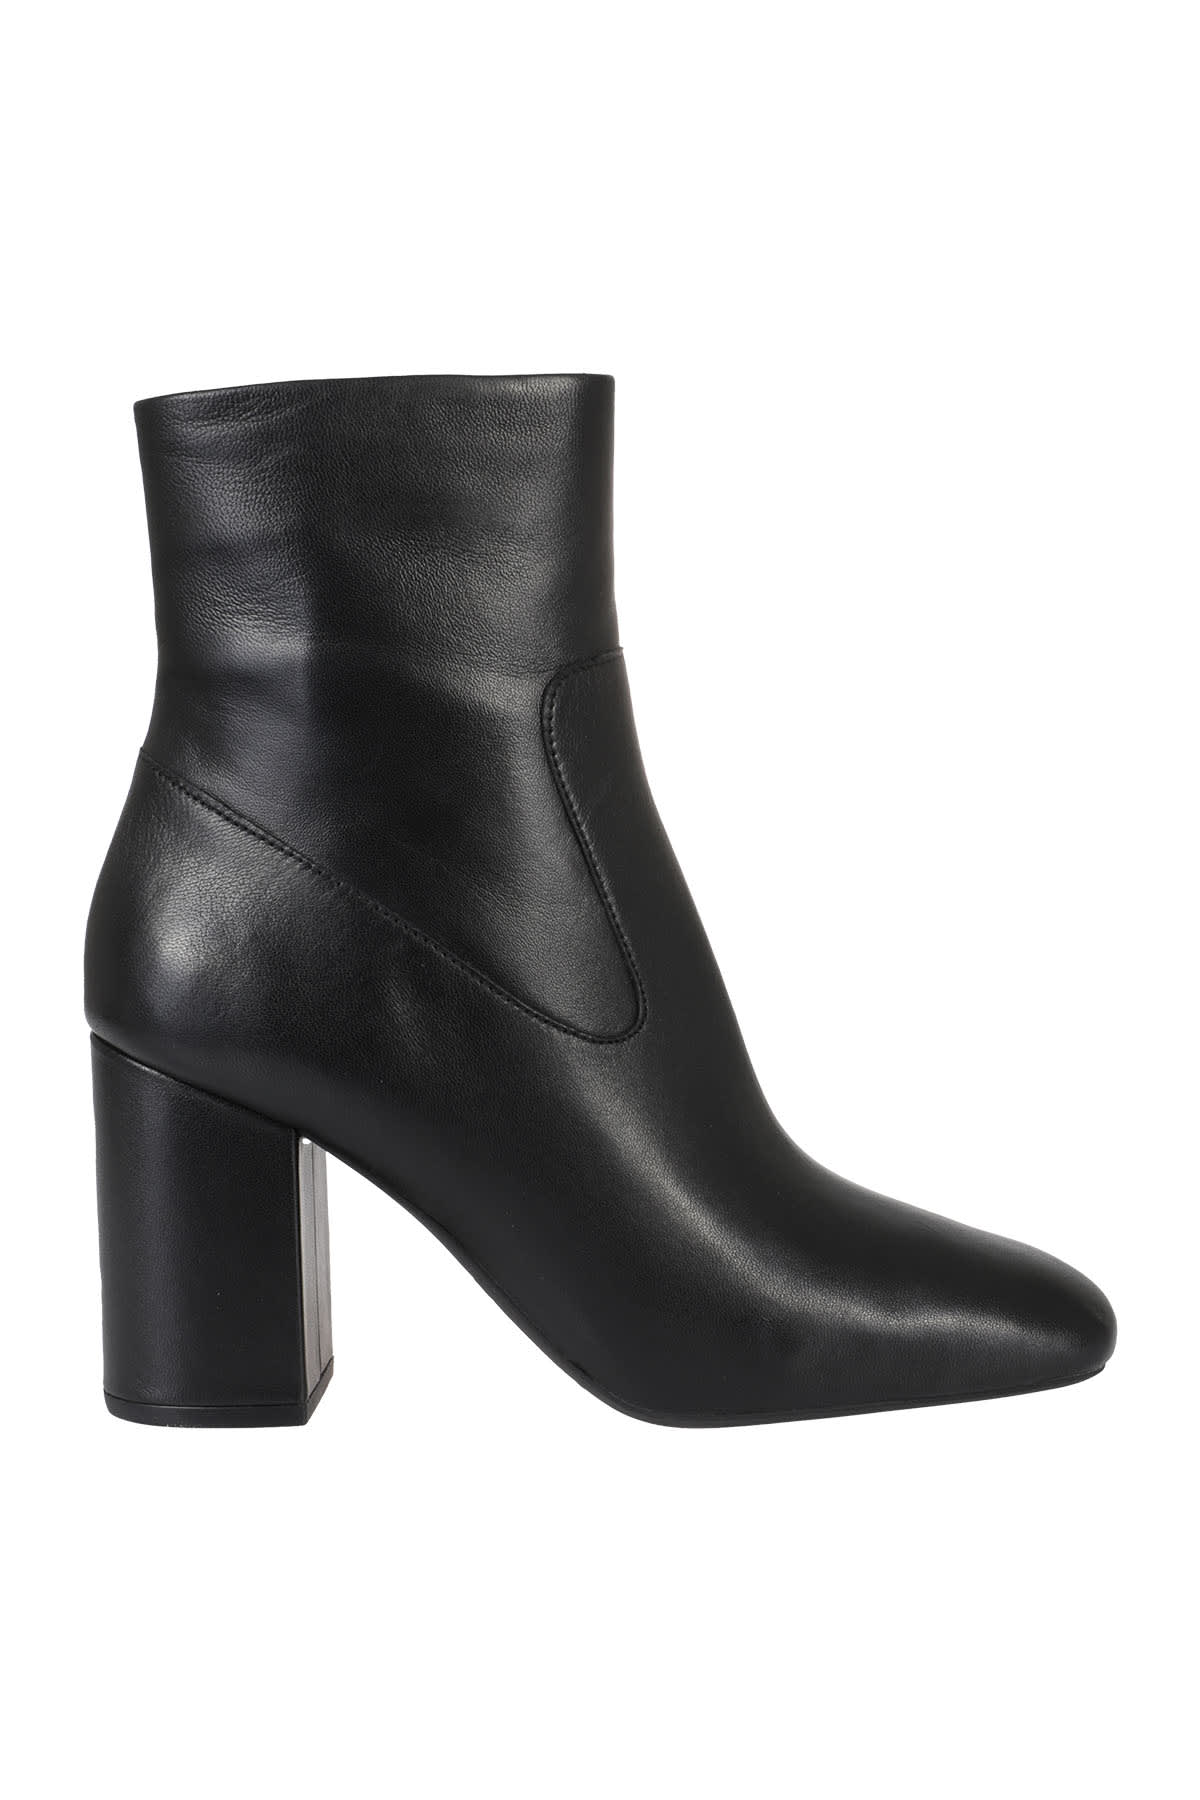 Buy Michael Kors Boots online, shop Michael Kors shoes with free shipping